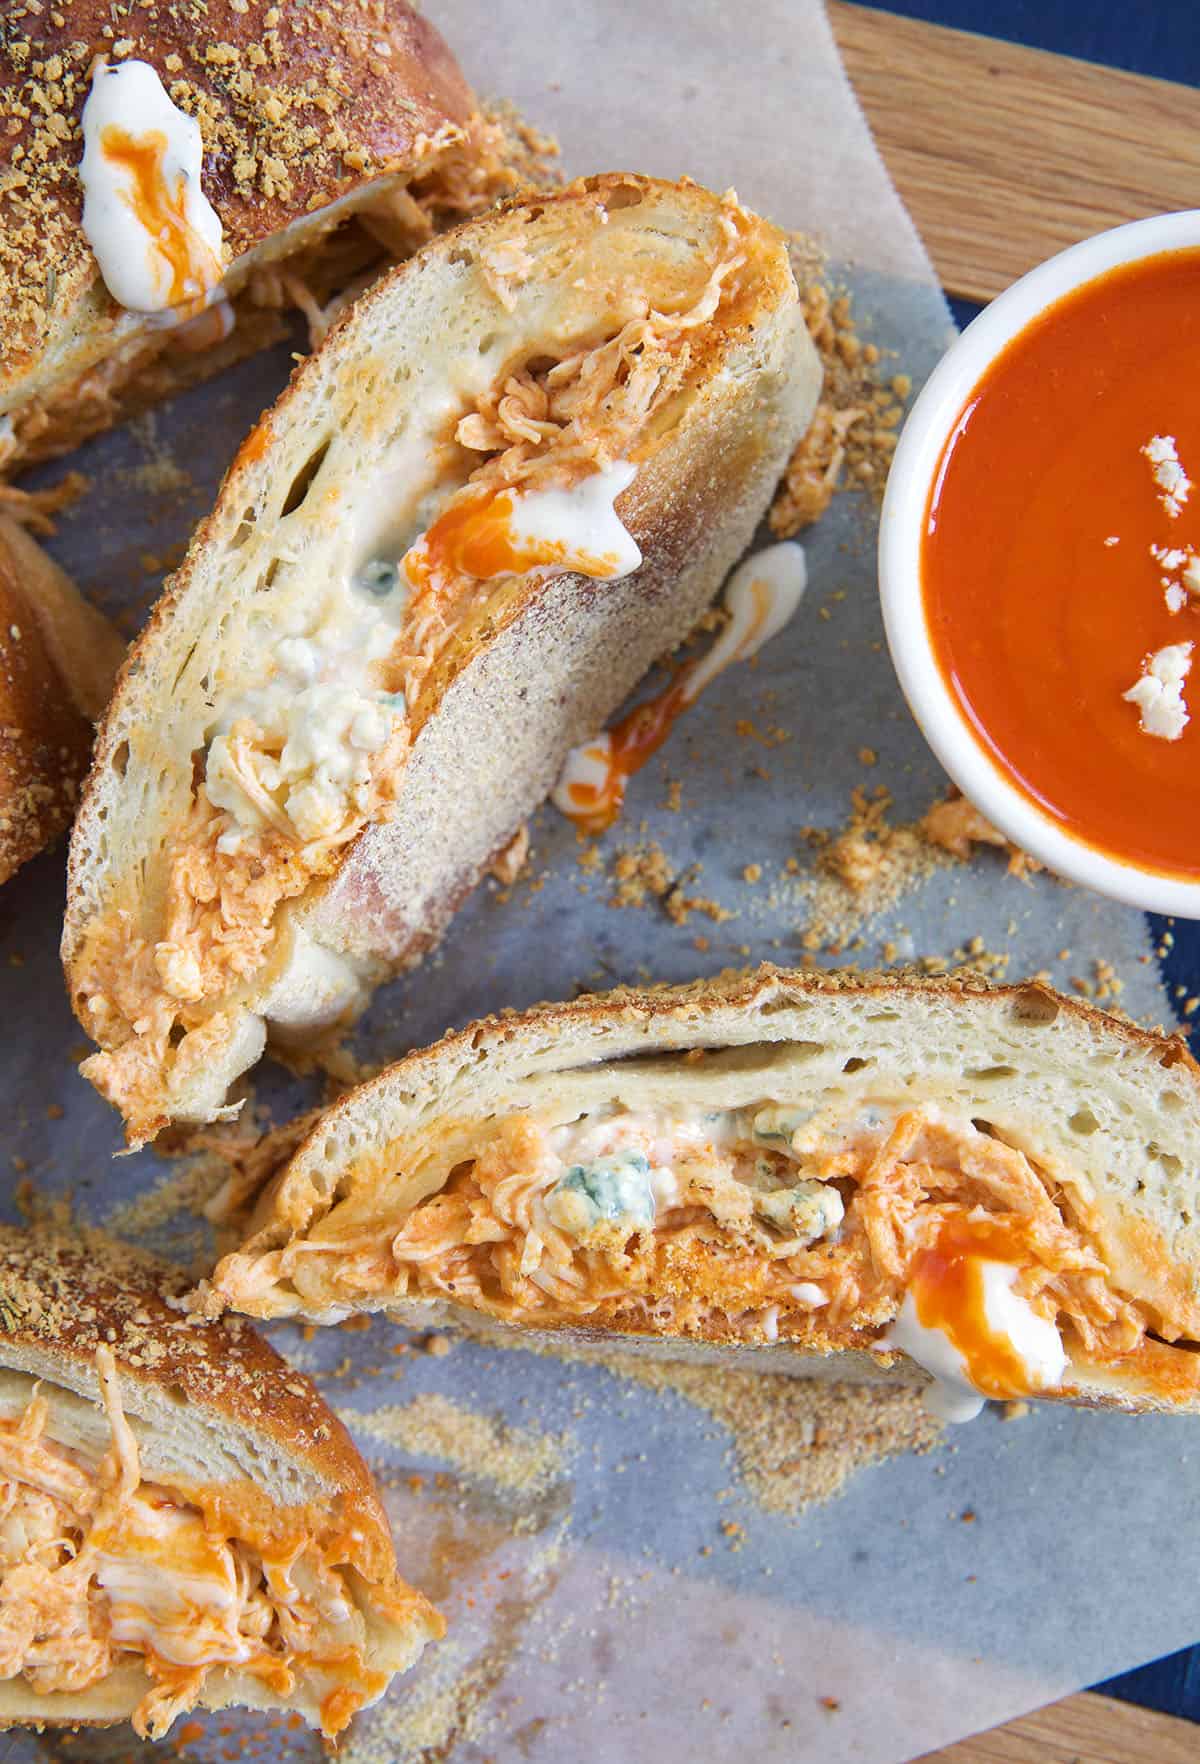 Several slices of stromboli are placed next to a bowl of dipping sauce.